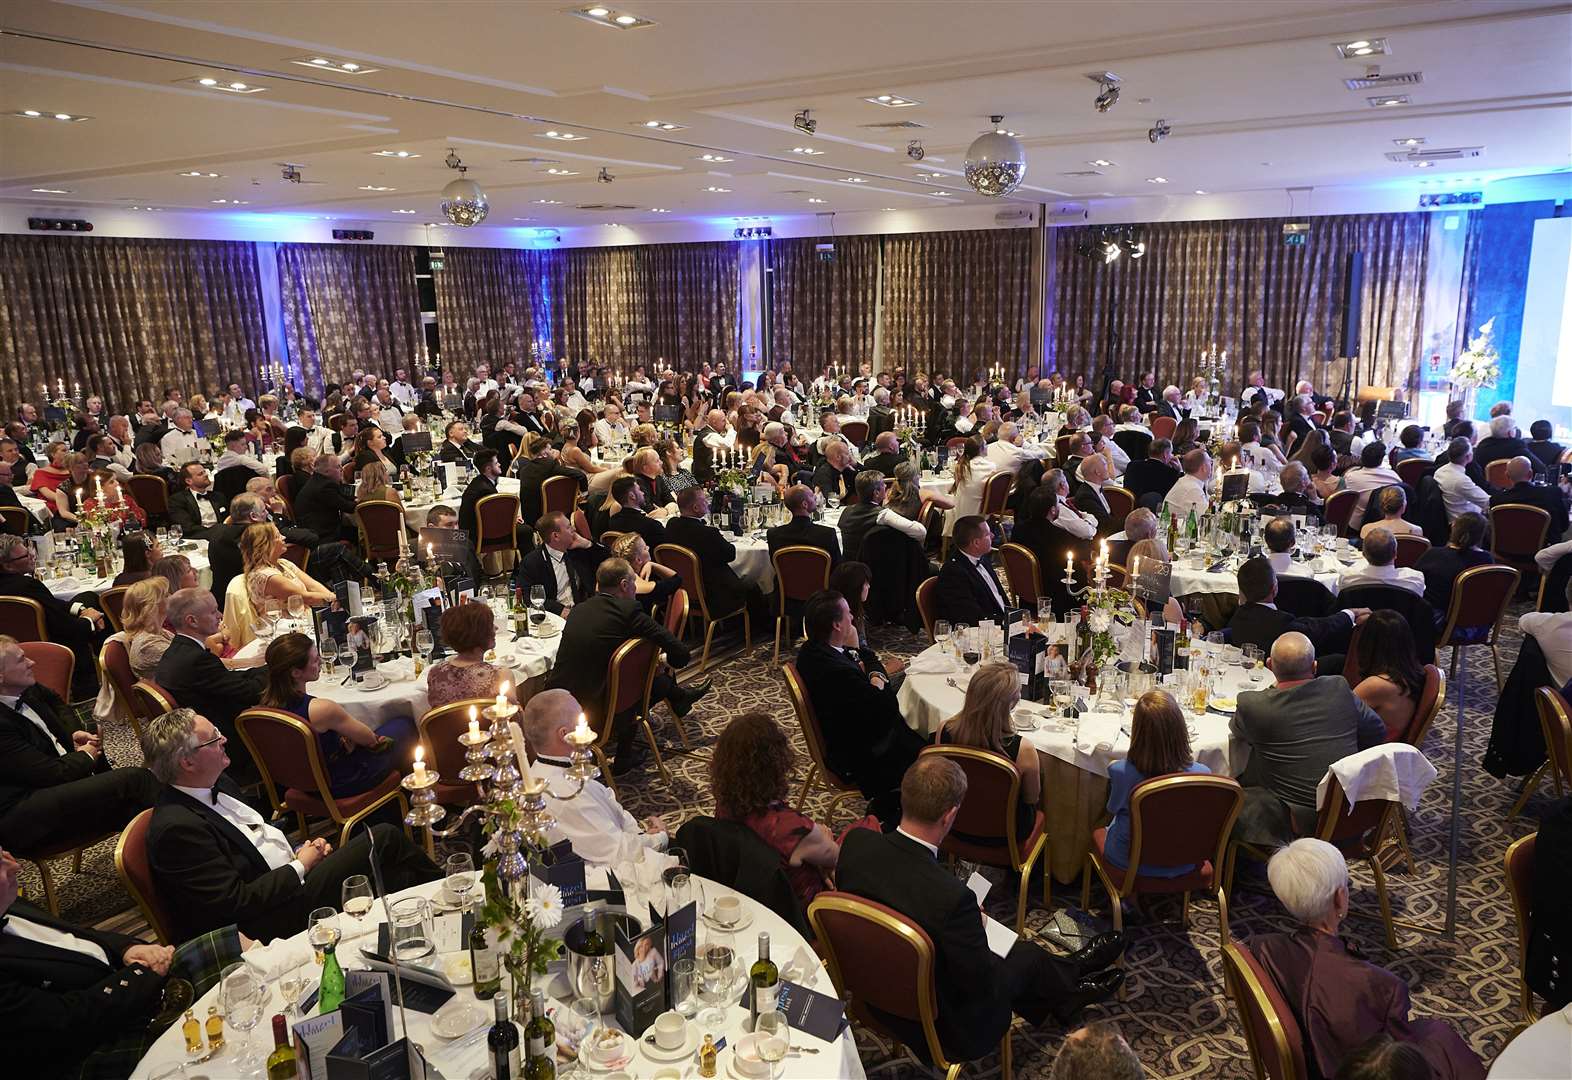 The Highland Business Dinner was last held pre-pandemic in 2019.